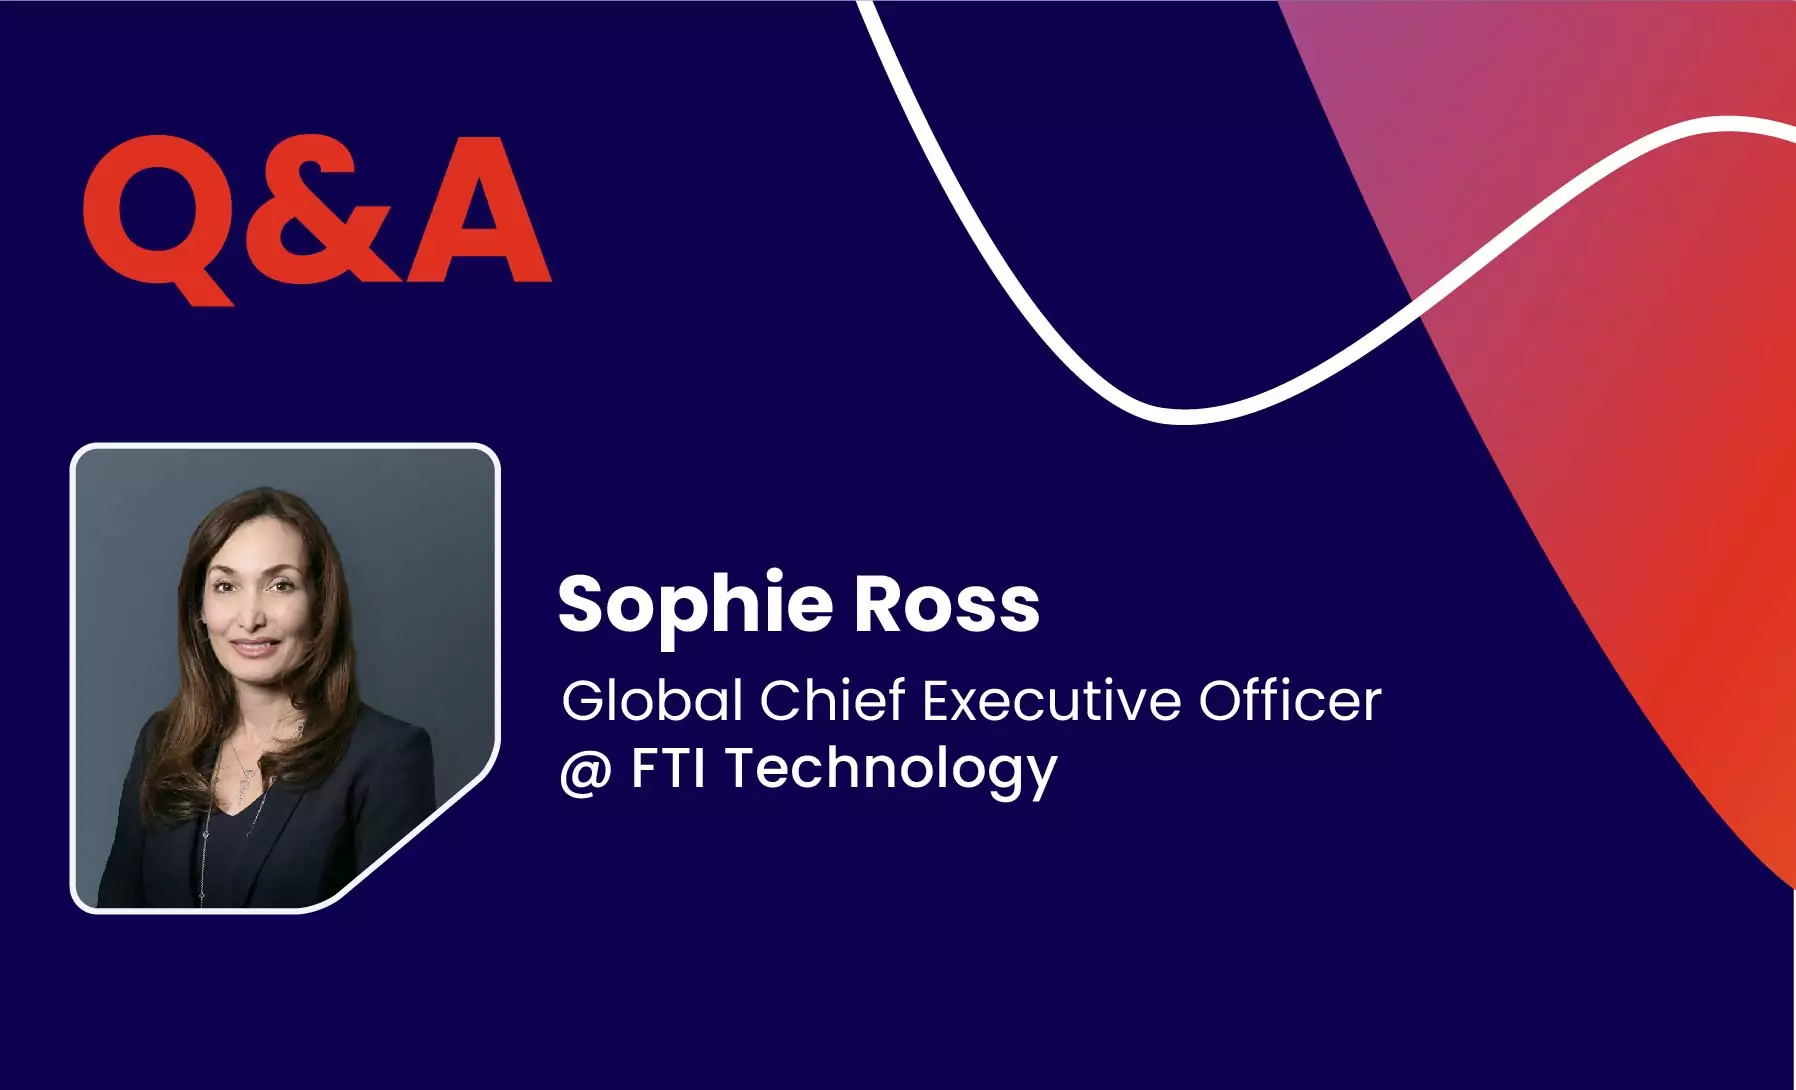 Q&A with Sophie Ross, Global Chief Executive Officer @ FTI Technology